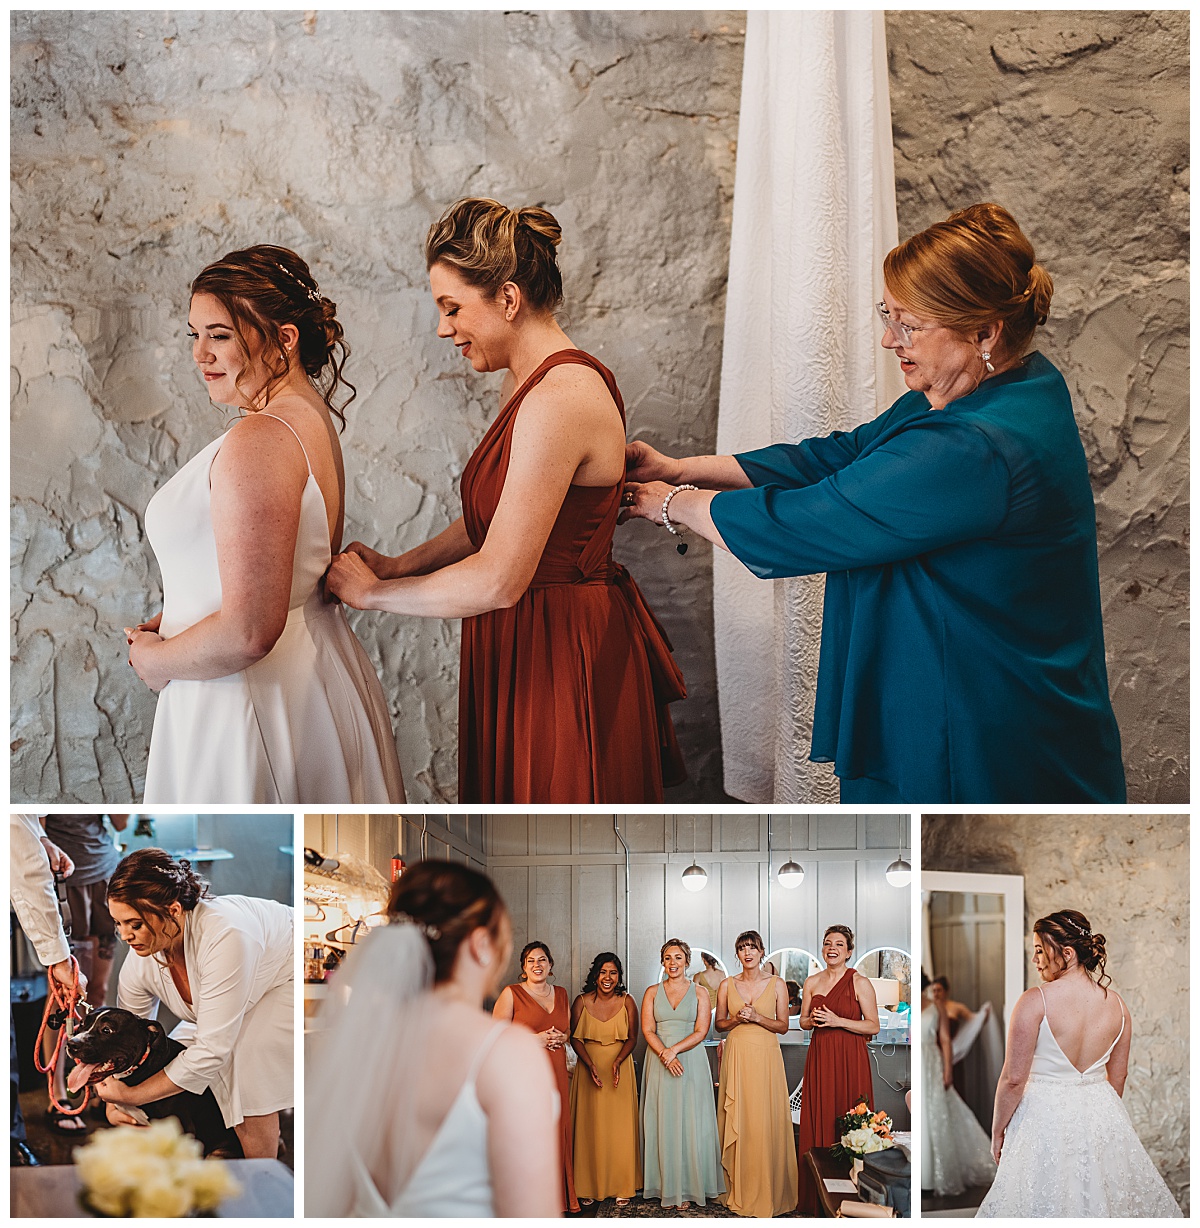 Bridal party first look at the bride for a summer wedding at Mainstreet Ballroom captured by Brittany Dunbar Photography, an Ellicott City Wedding Photographer.